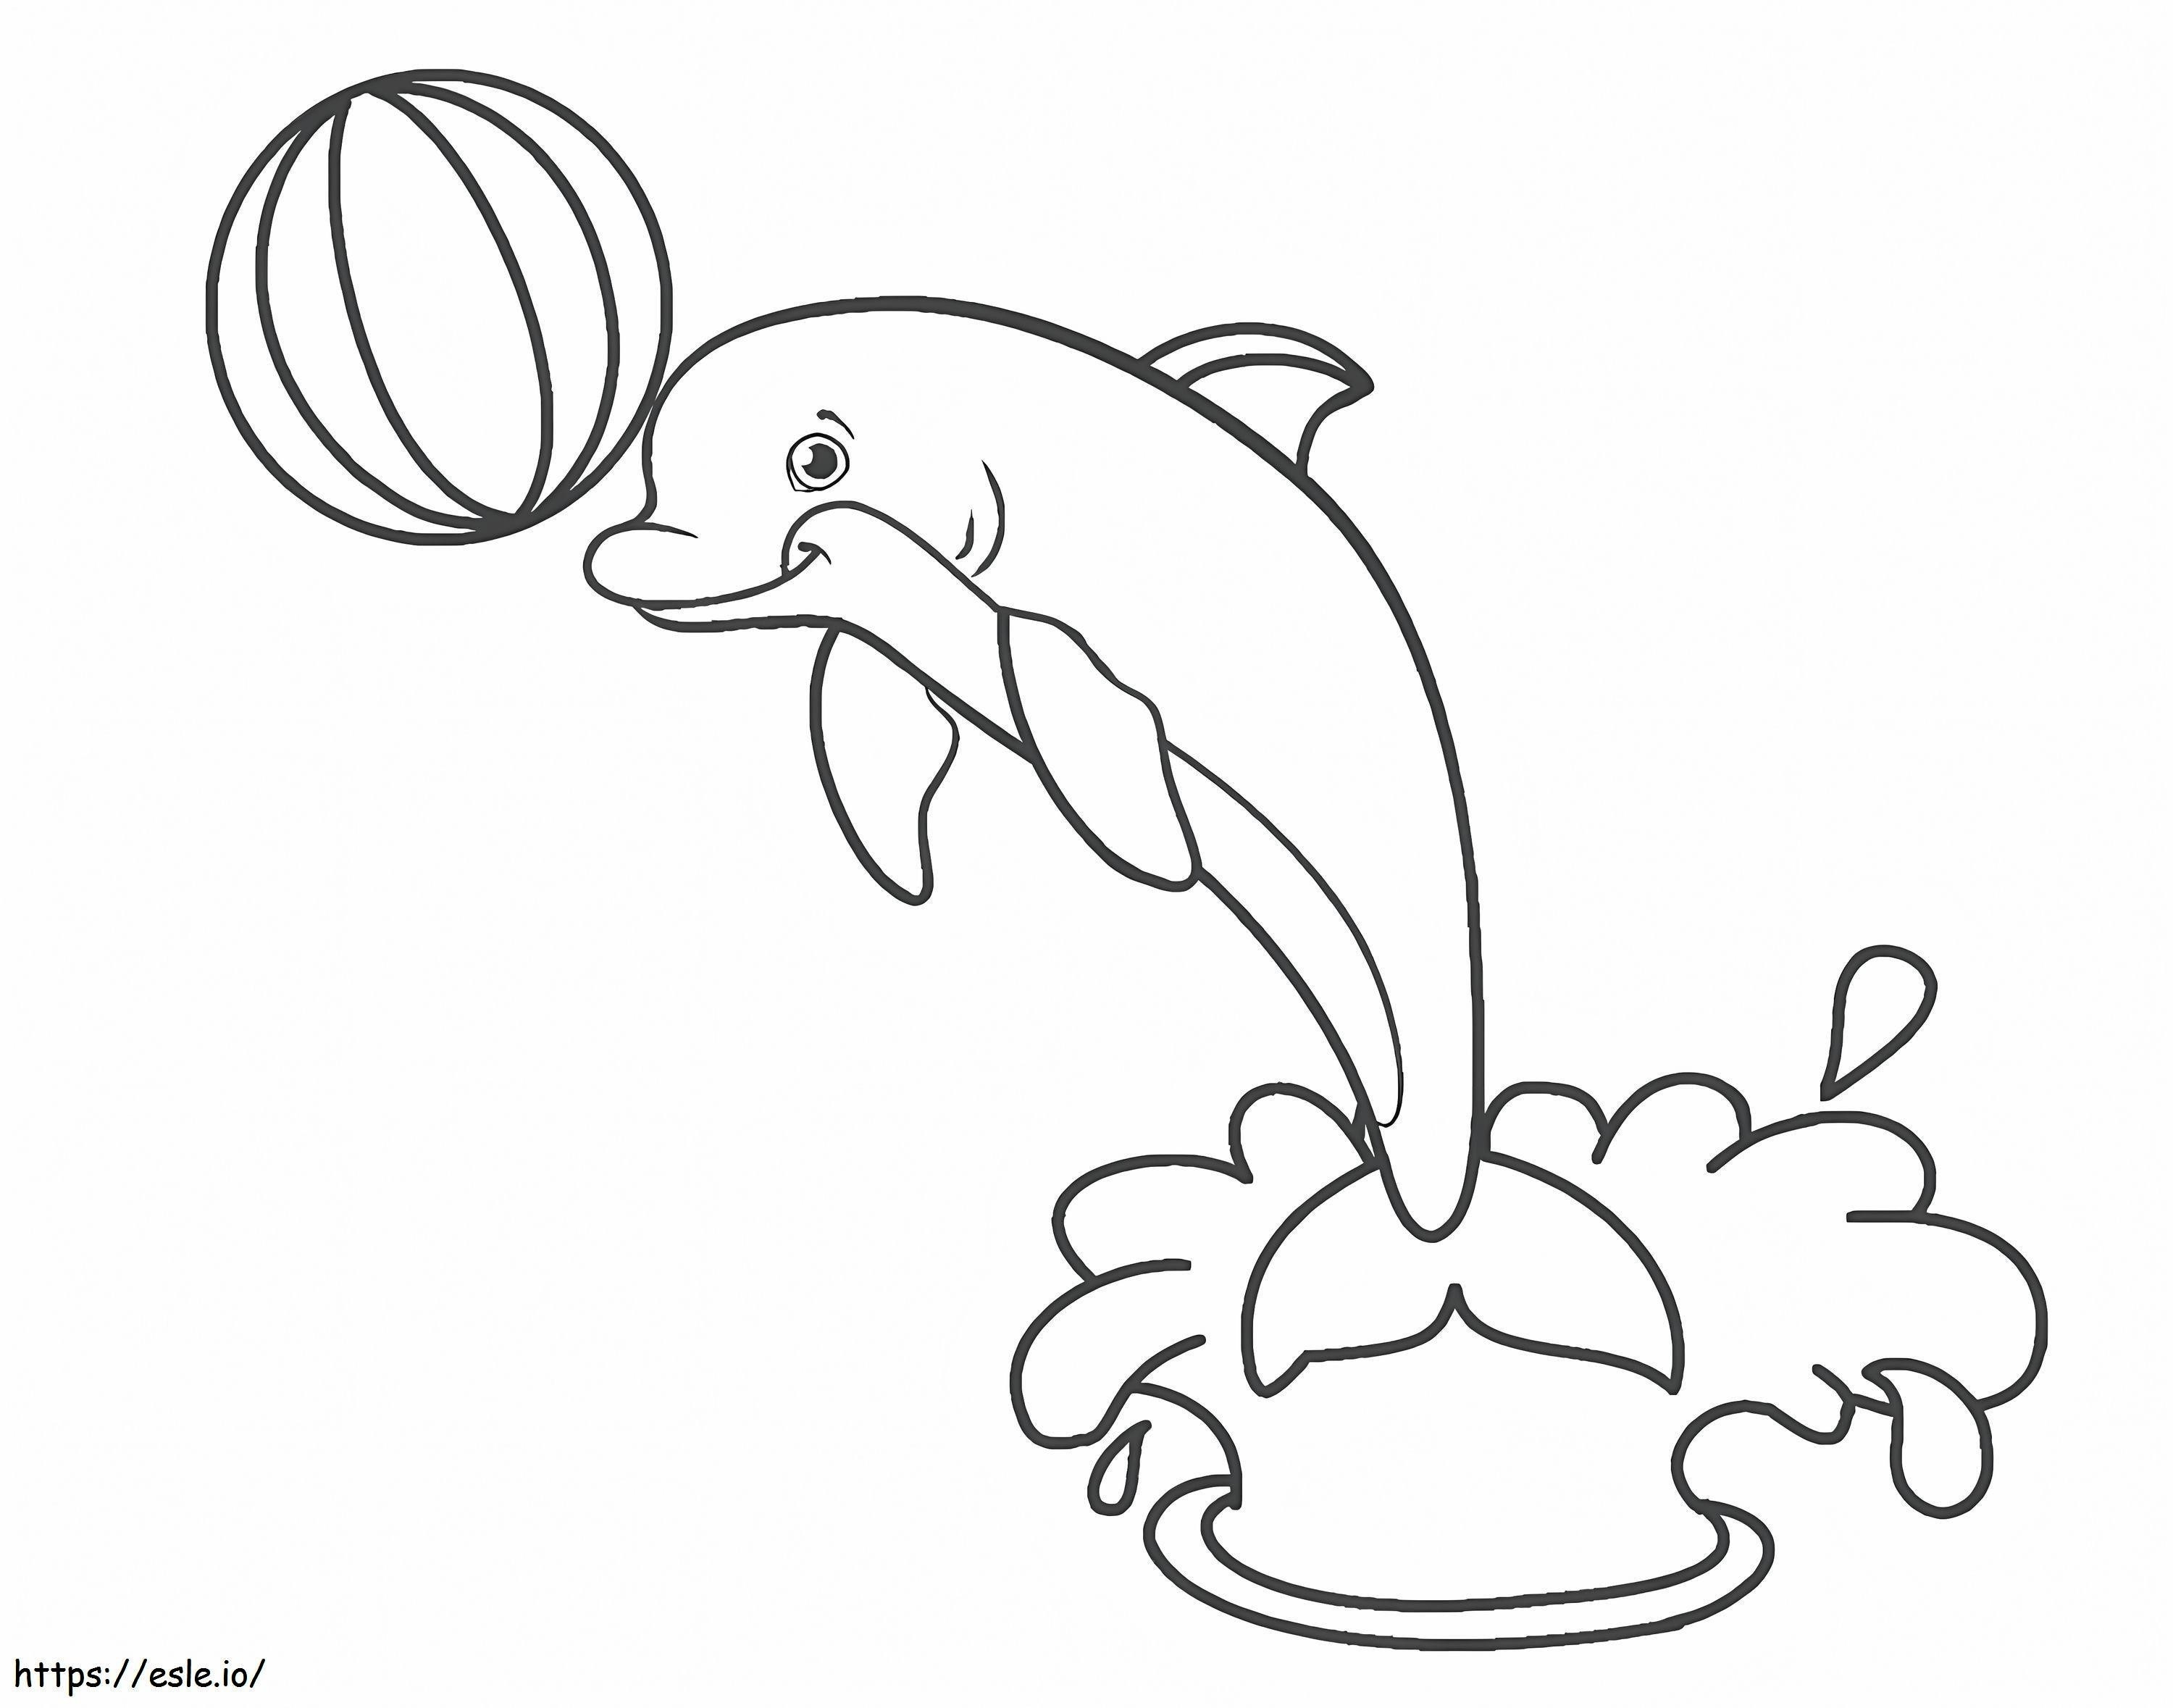 Dolphin With Ball coloring page